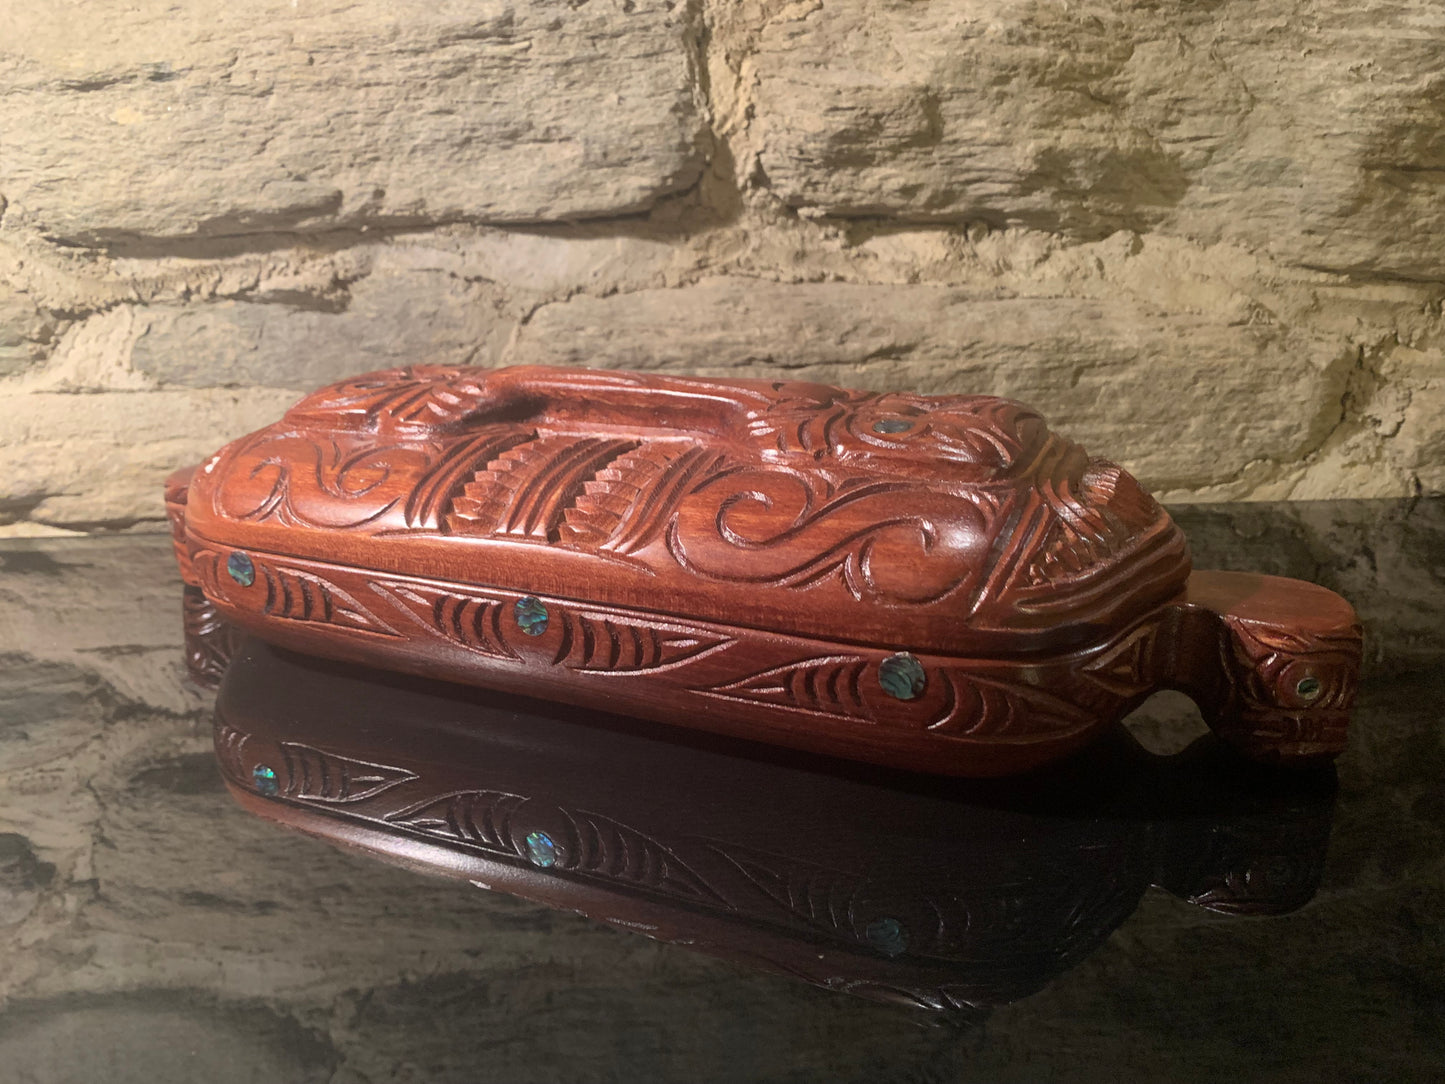 Maori wakahuia jewellery treasure box carved in New Zealand and available from Silver Fern Gallery